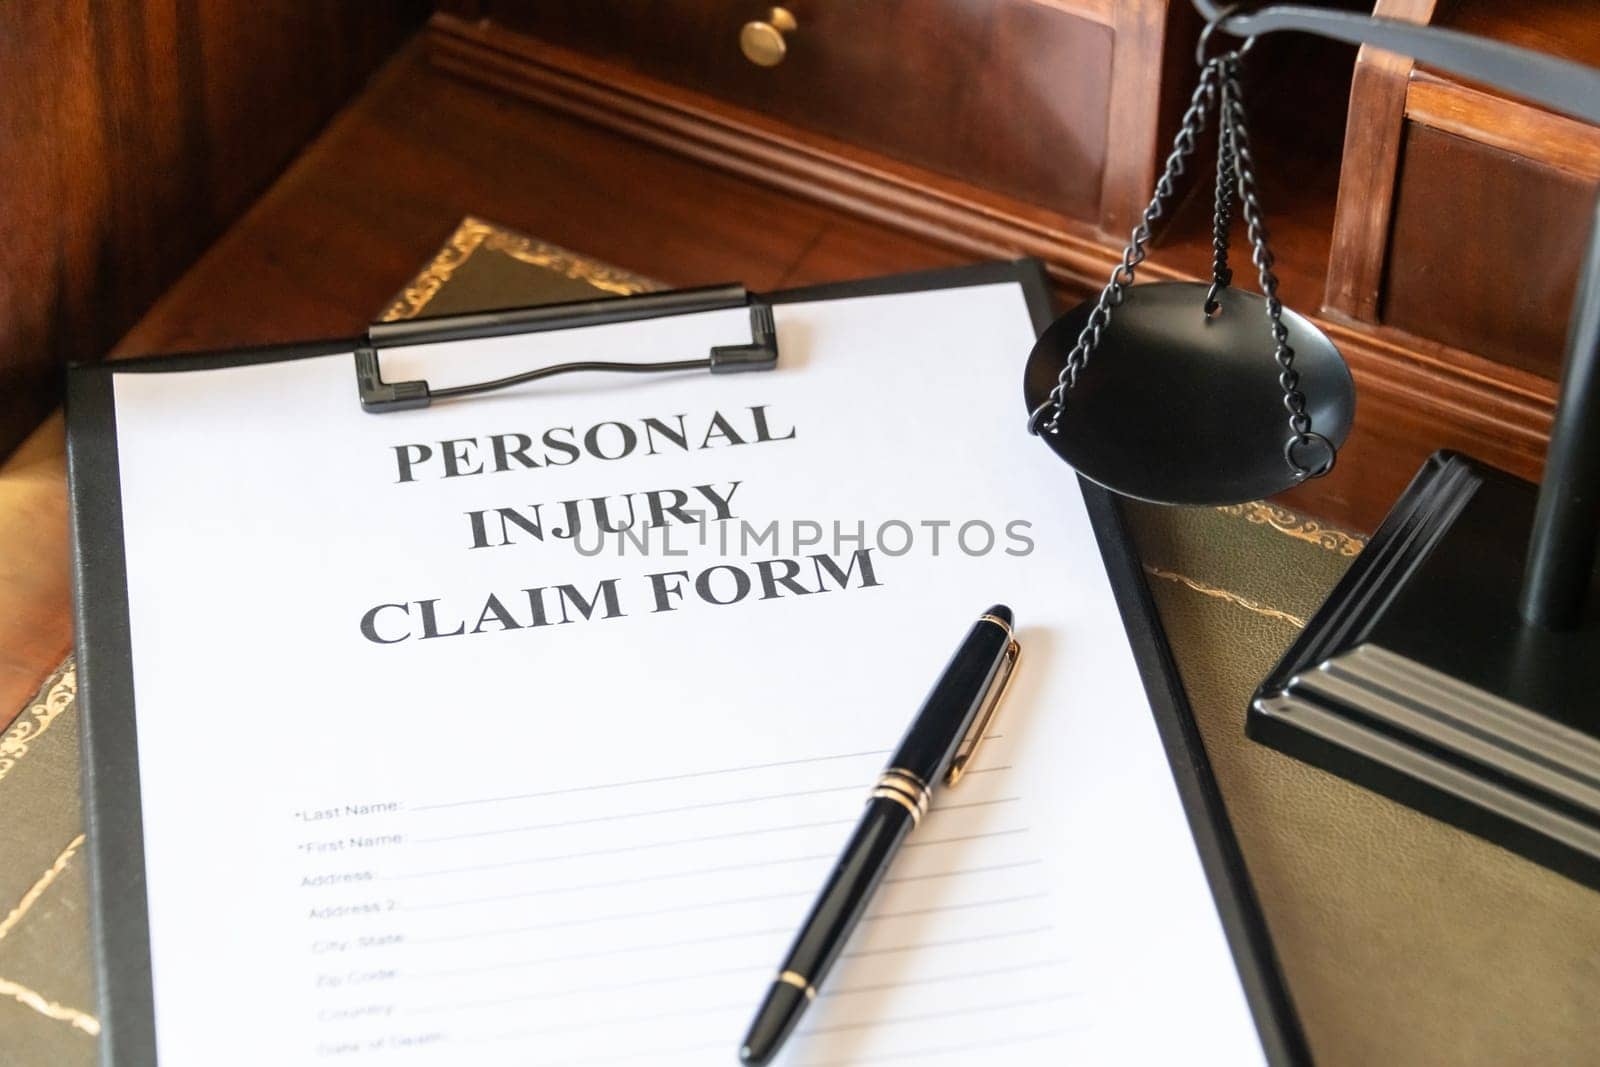 Personal Injury Claim Form on a Lawyer's Desk. by jbruiz78